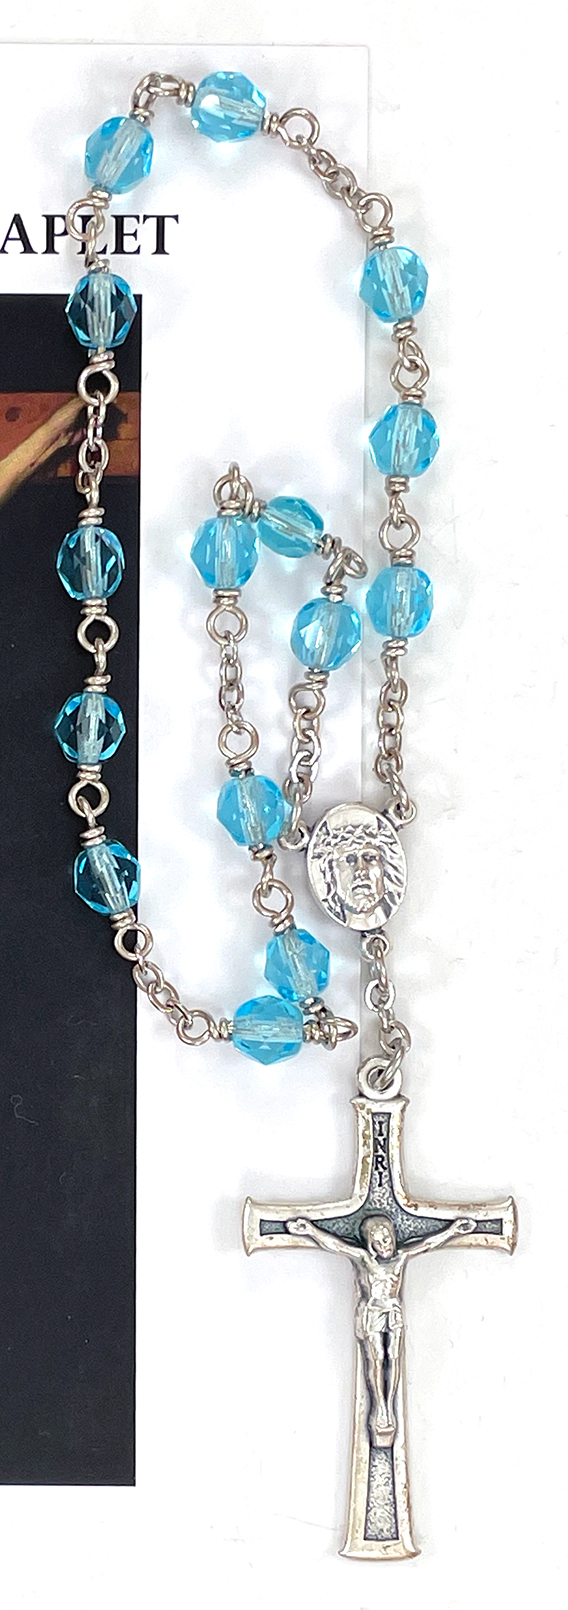 Z154: Act of Contrition Chaplet ($12.99 CAD)